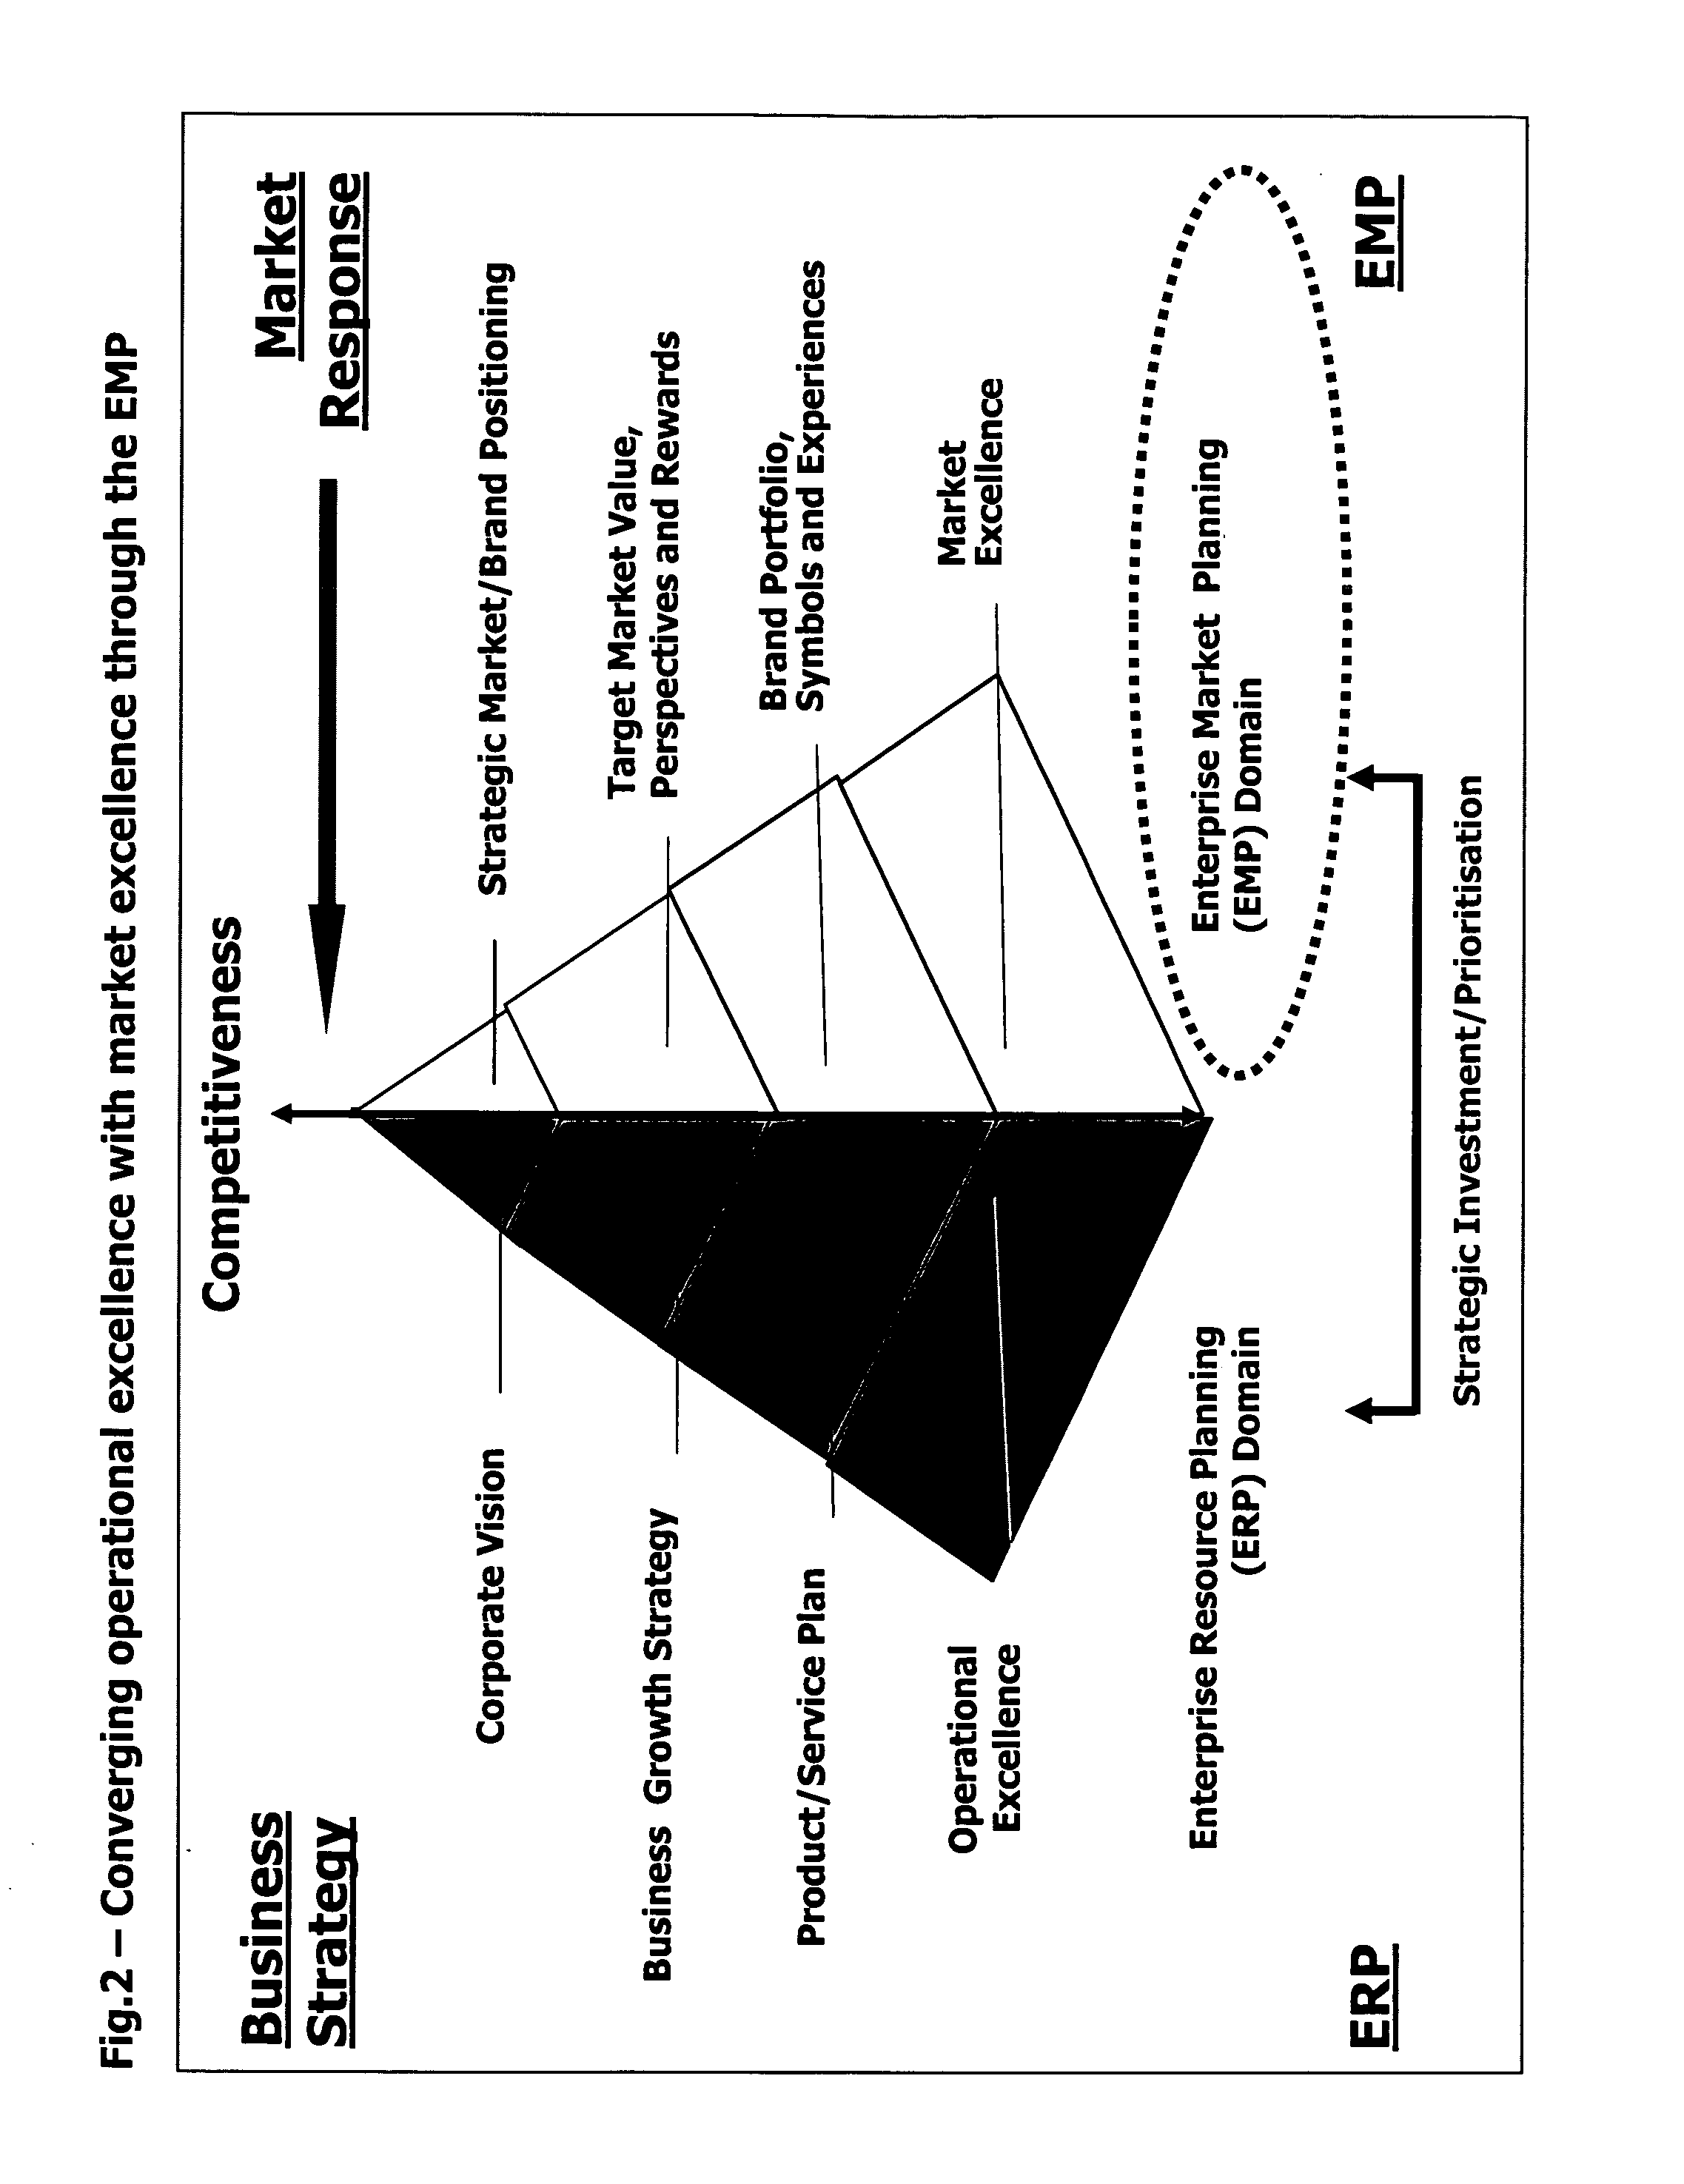 Apparatus and method for integrating enterprise market planning processes and information systems (EMP) with enterprise resource planning processes and information systems (ERP) in emerging brand companies